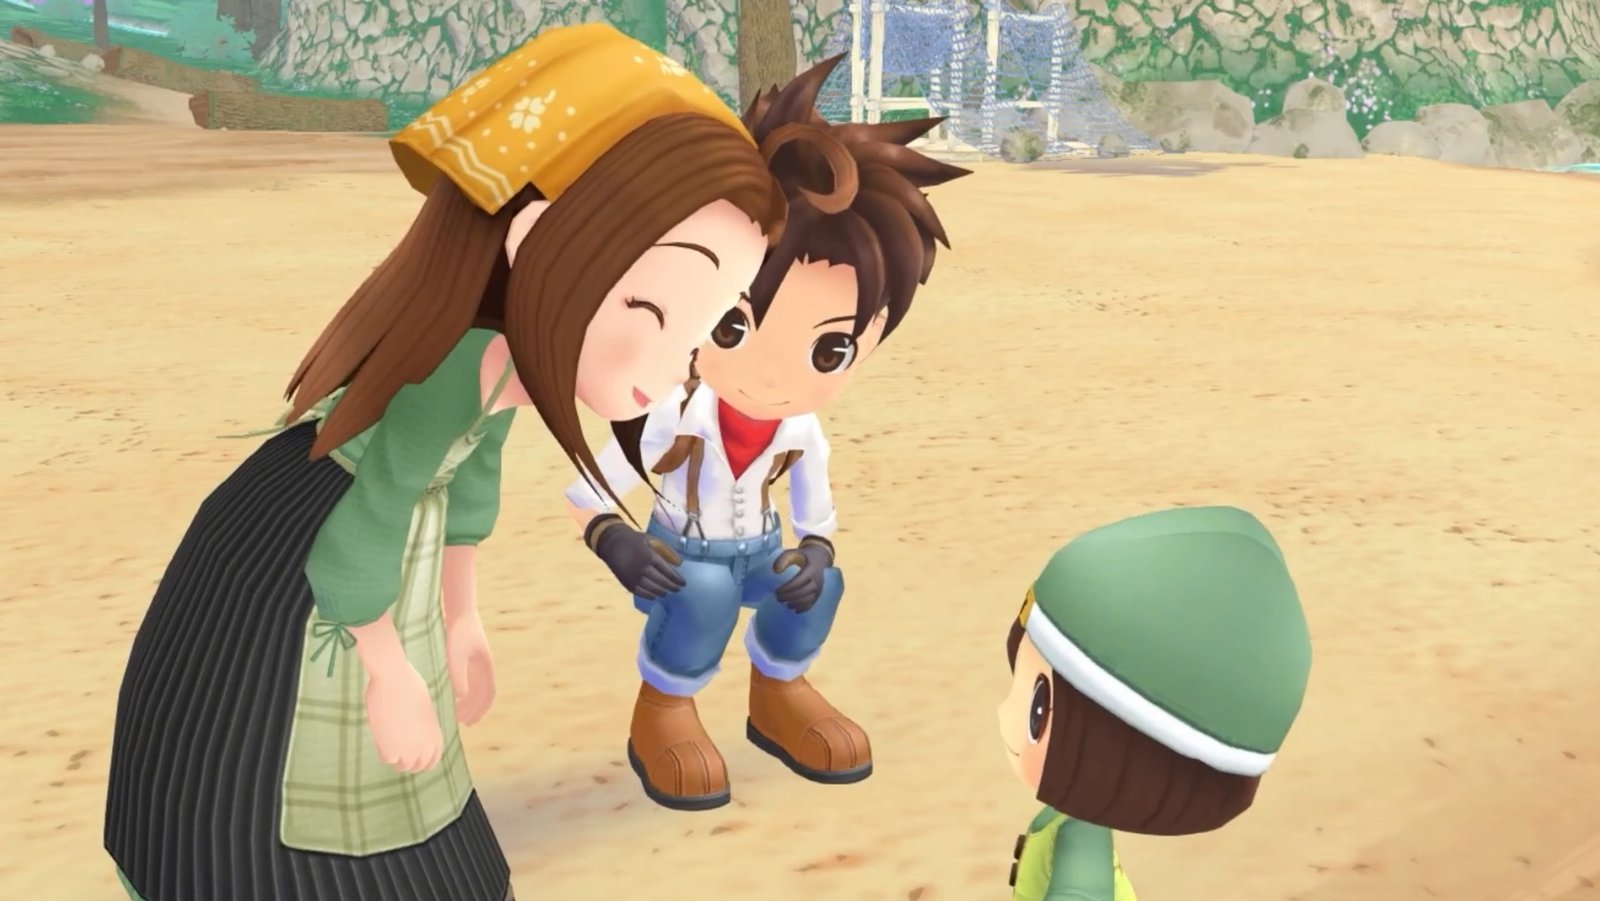 Story of Seasons: A Wonderful Life - The farmer and Cecilia bend down to talk to their toddler near the beach.